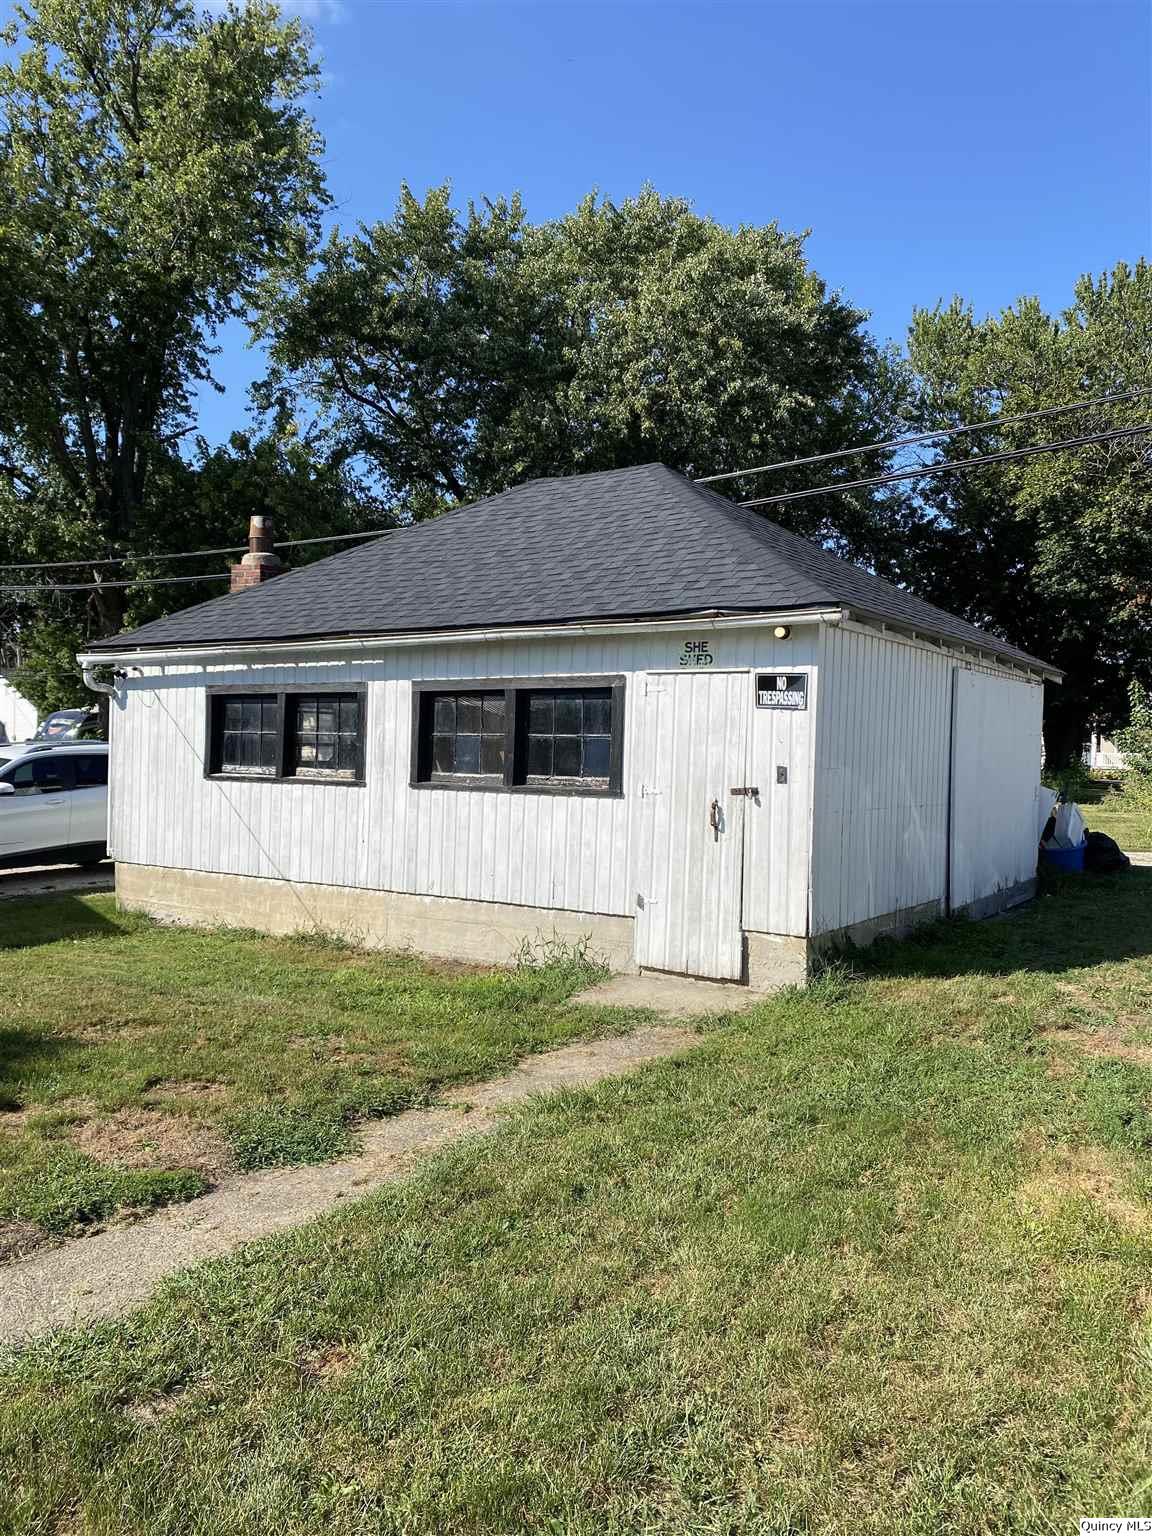 309 W Main, Mt. Sterling, Illinois 62353, 2 Bedrooms Bedrooms, ,1 BathroomBathrooms,Residential,For Sale,309 W Main,203017